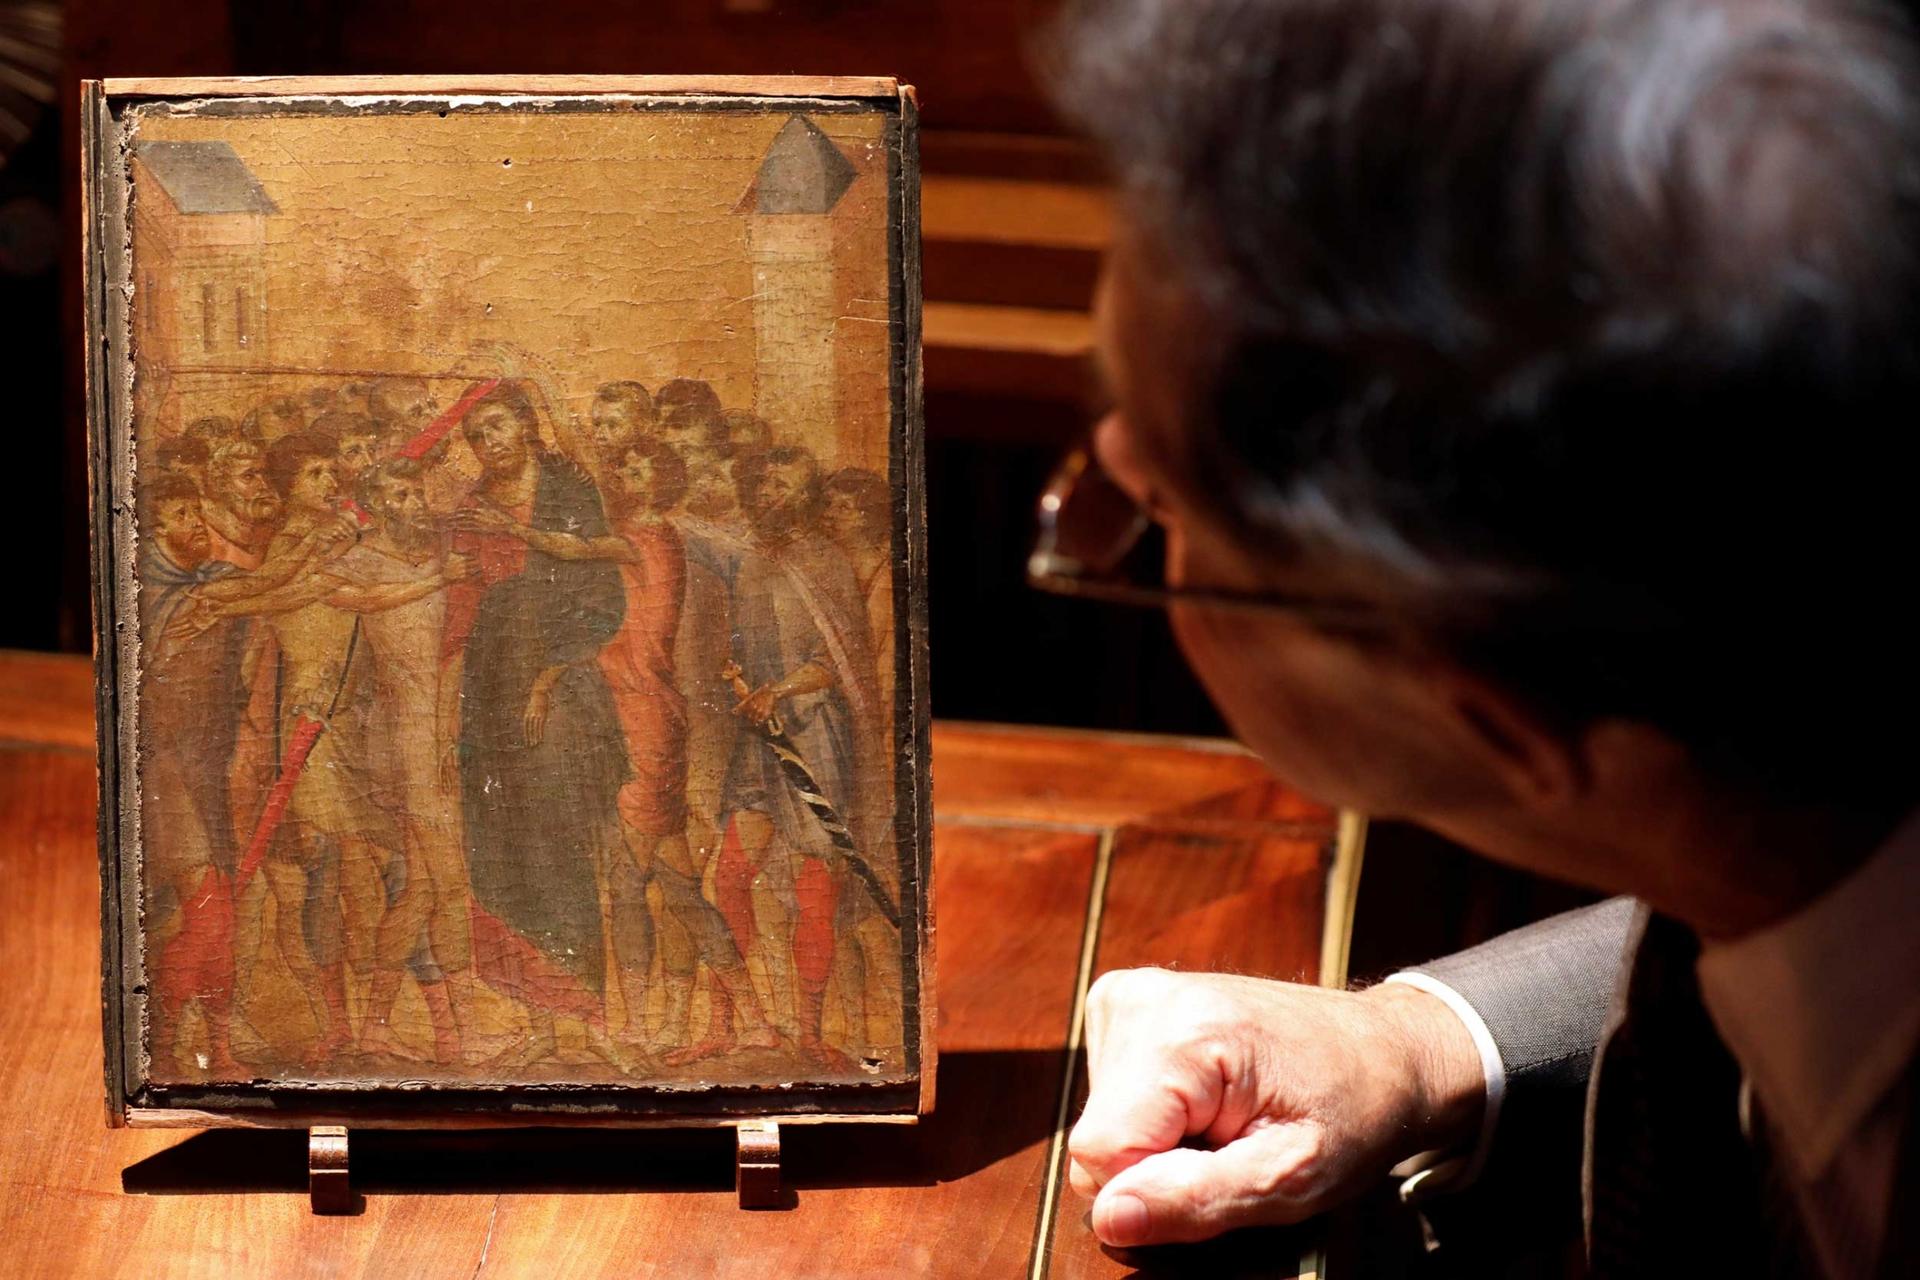 A man looks closely at a small religious image showing Christ surrounded by other men